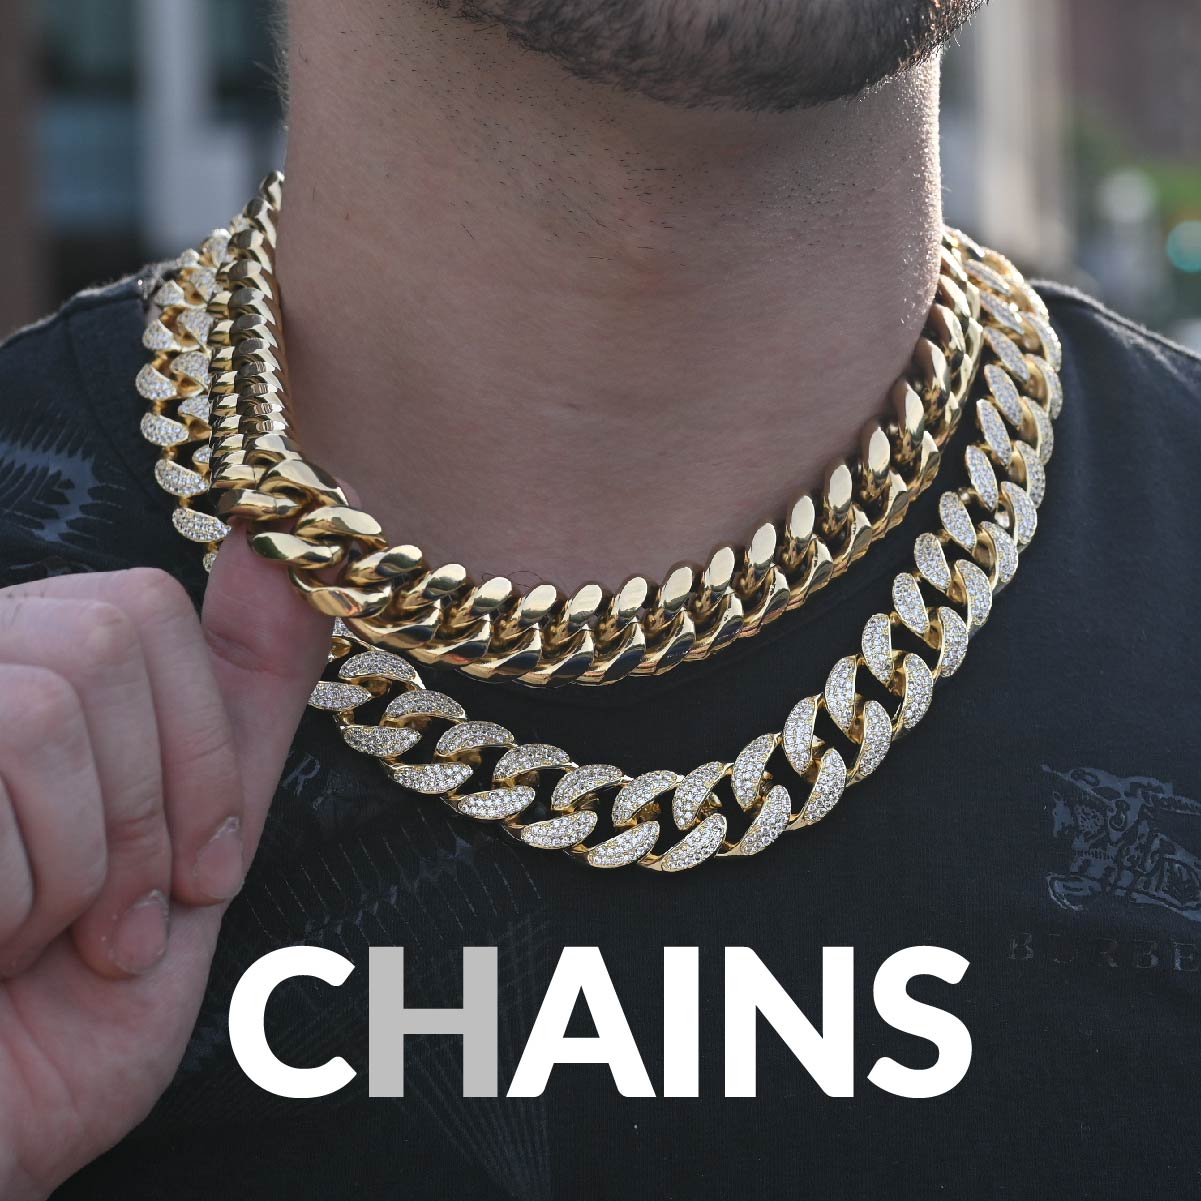 CHAINS - Free Shipping + Life Time Warranty